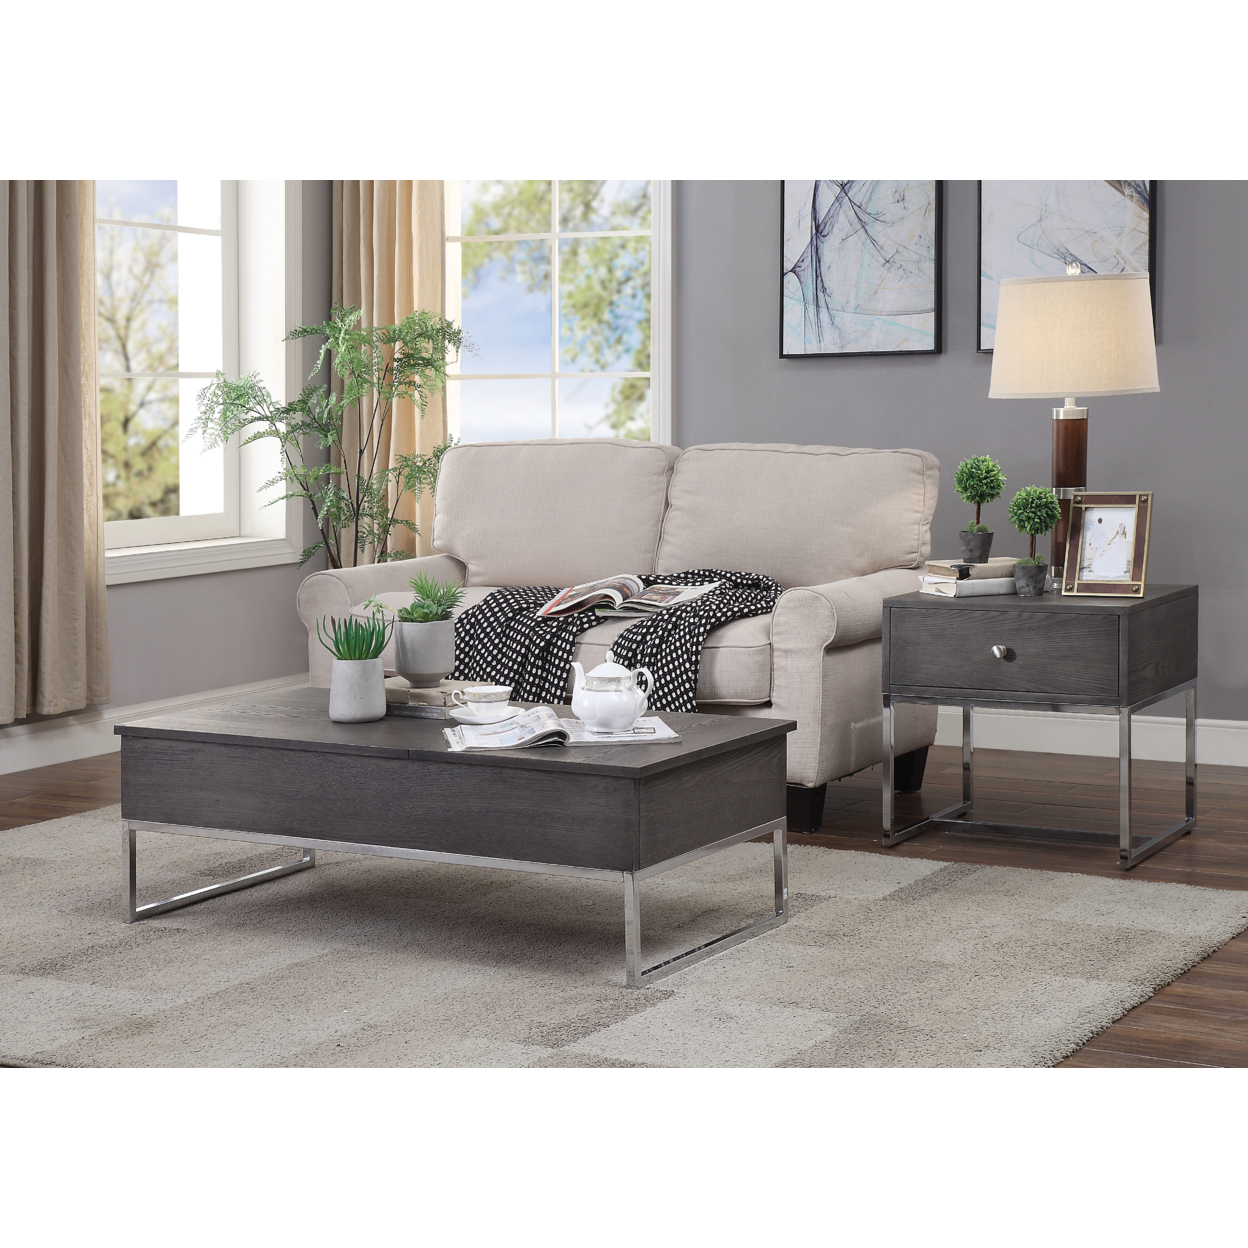 Wooden Coffee Table With Two Lift Tops And Metal Sled Leg Support, Gray And Silver- Saltoro Sherpi